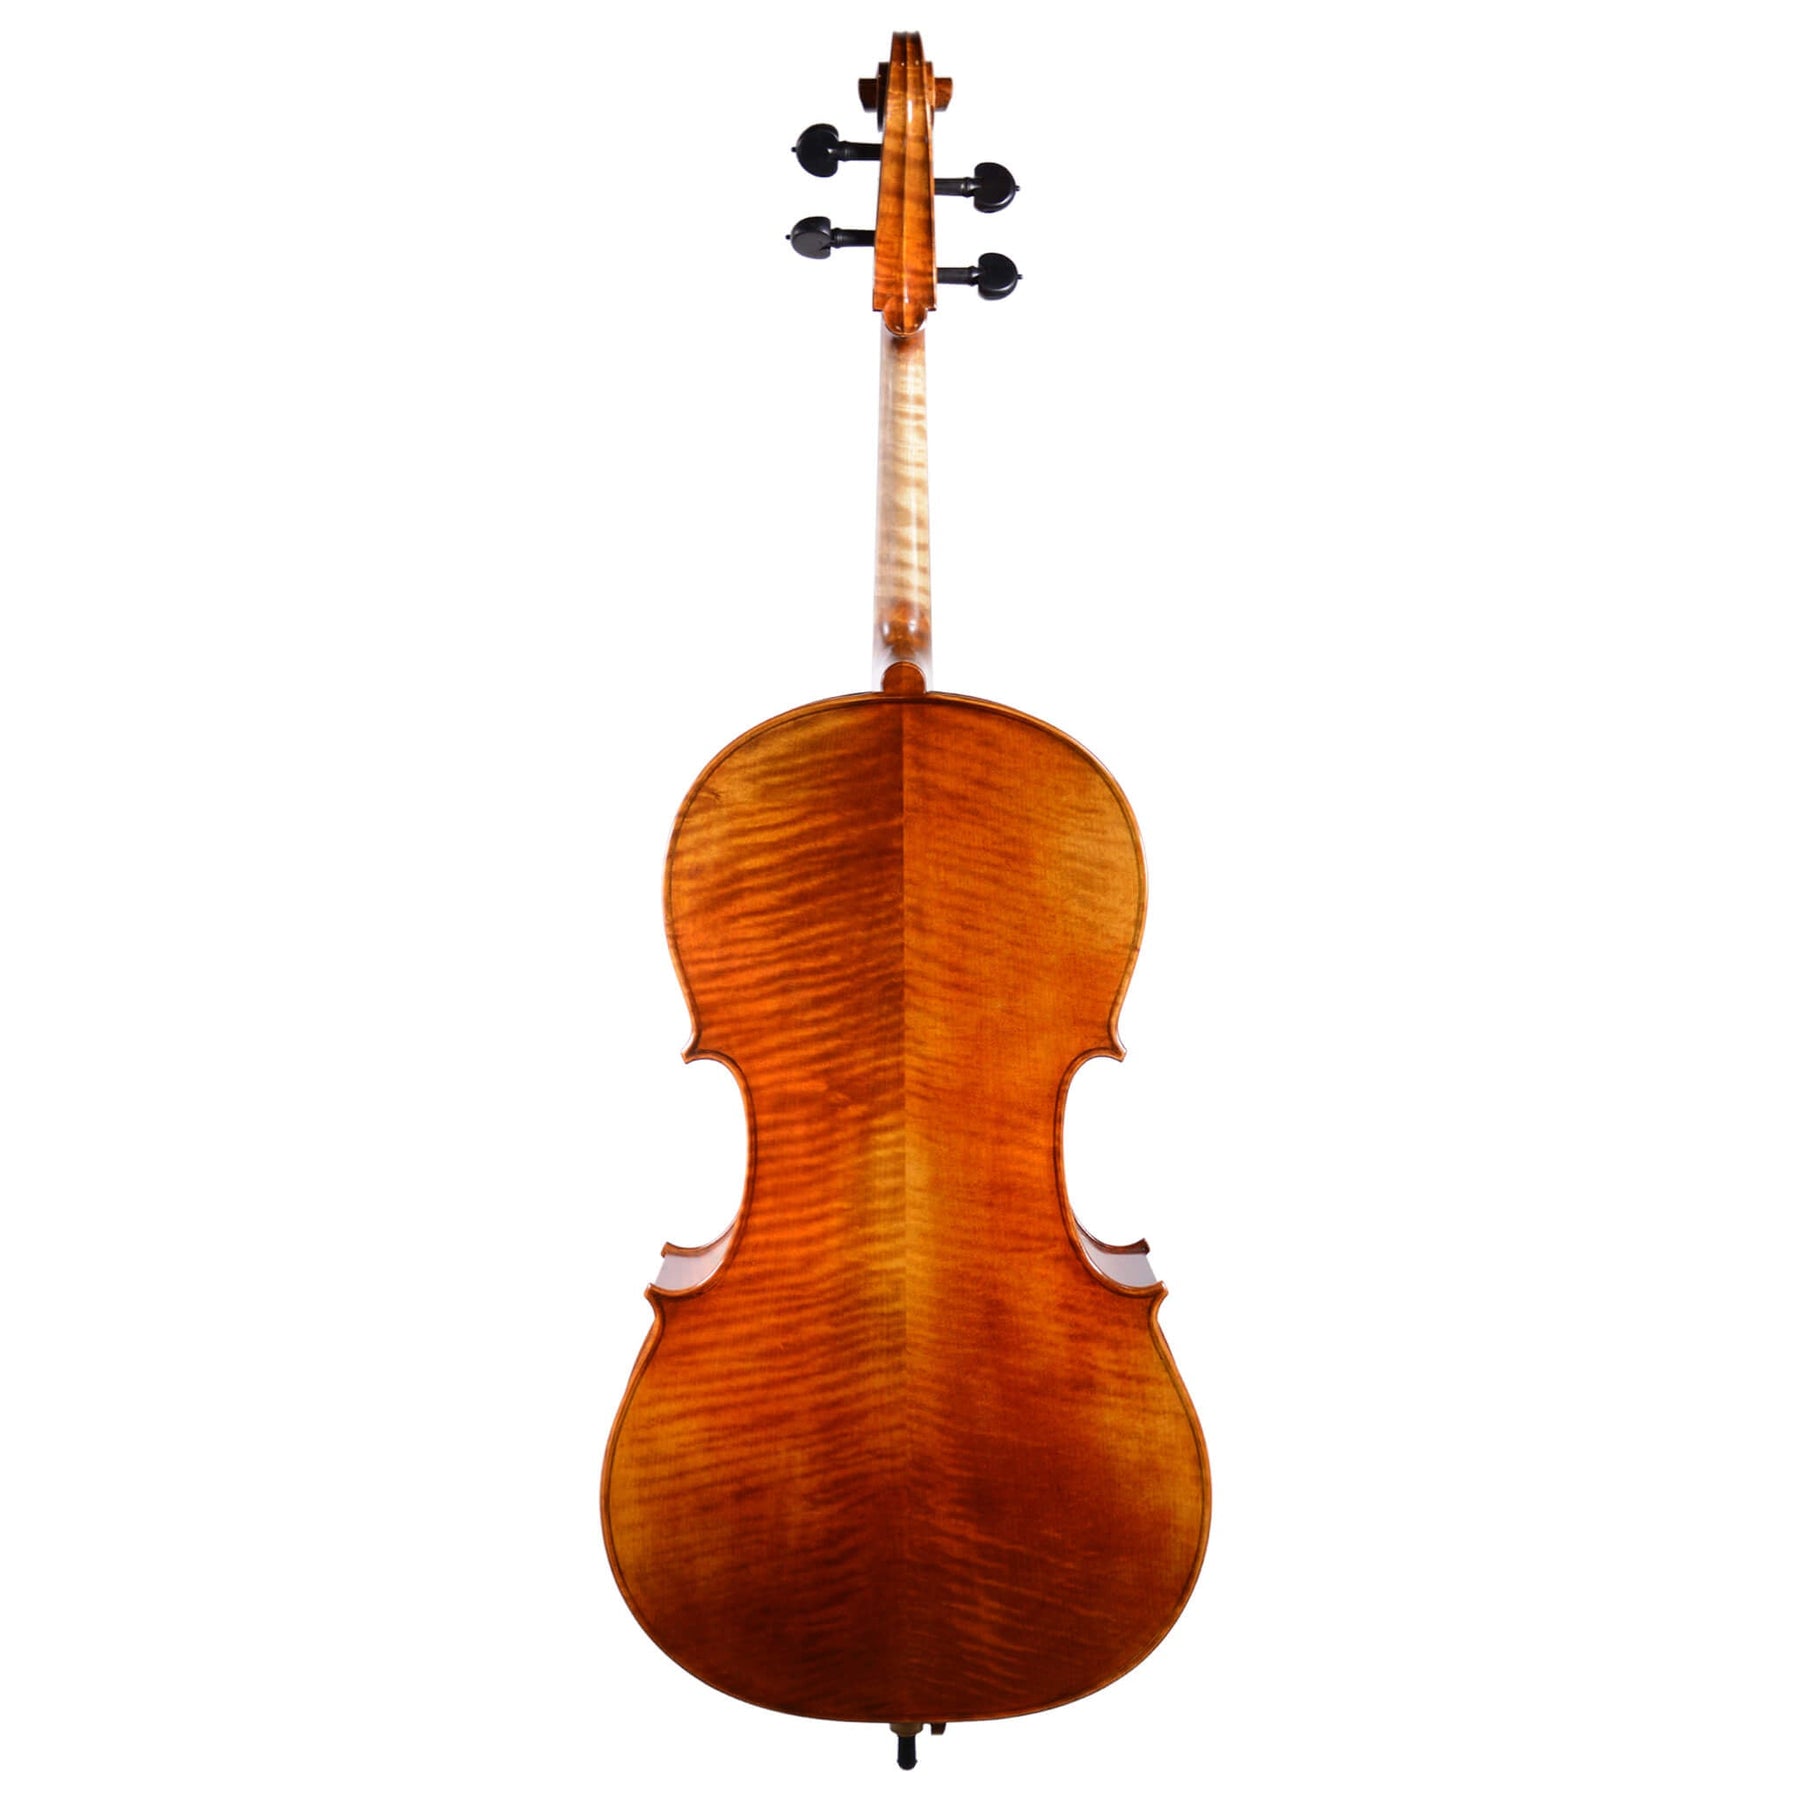 B-Stock Fiddlerman Master Cello Outfit